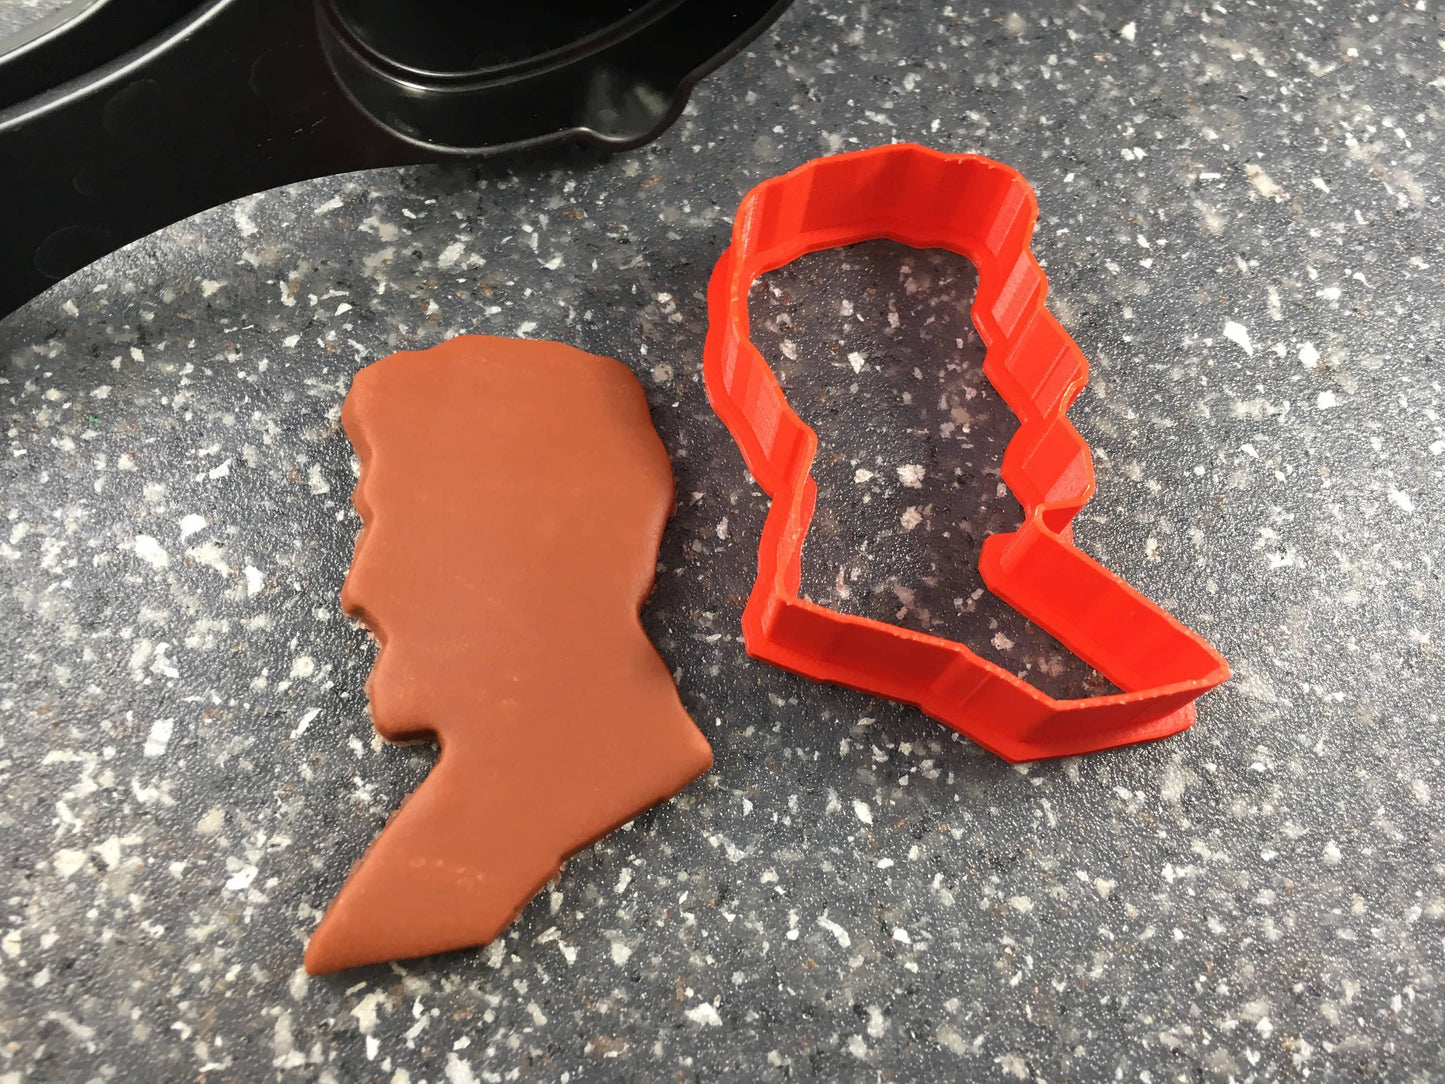 Lincoln Silhouette Cookie Cutter